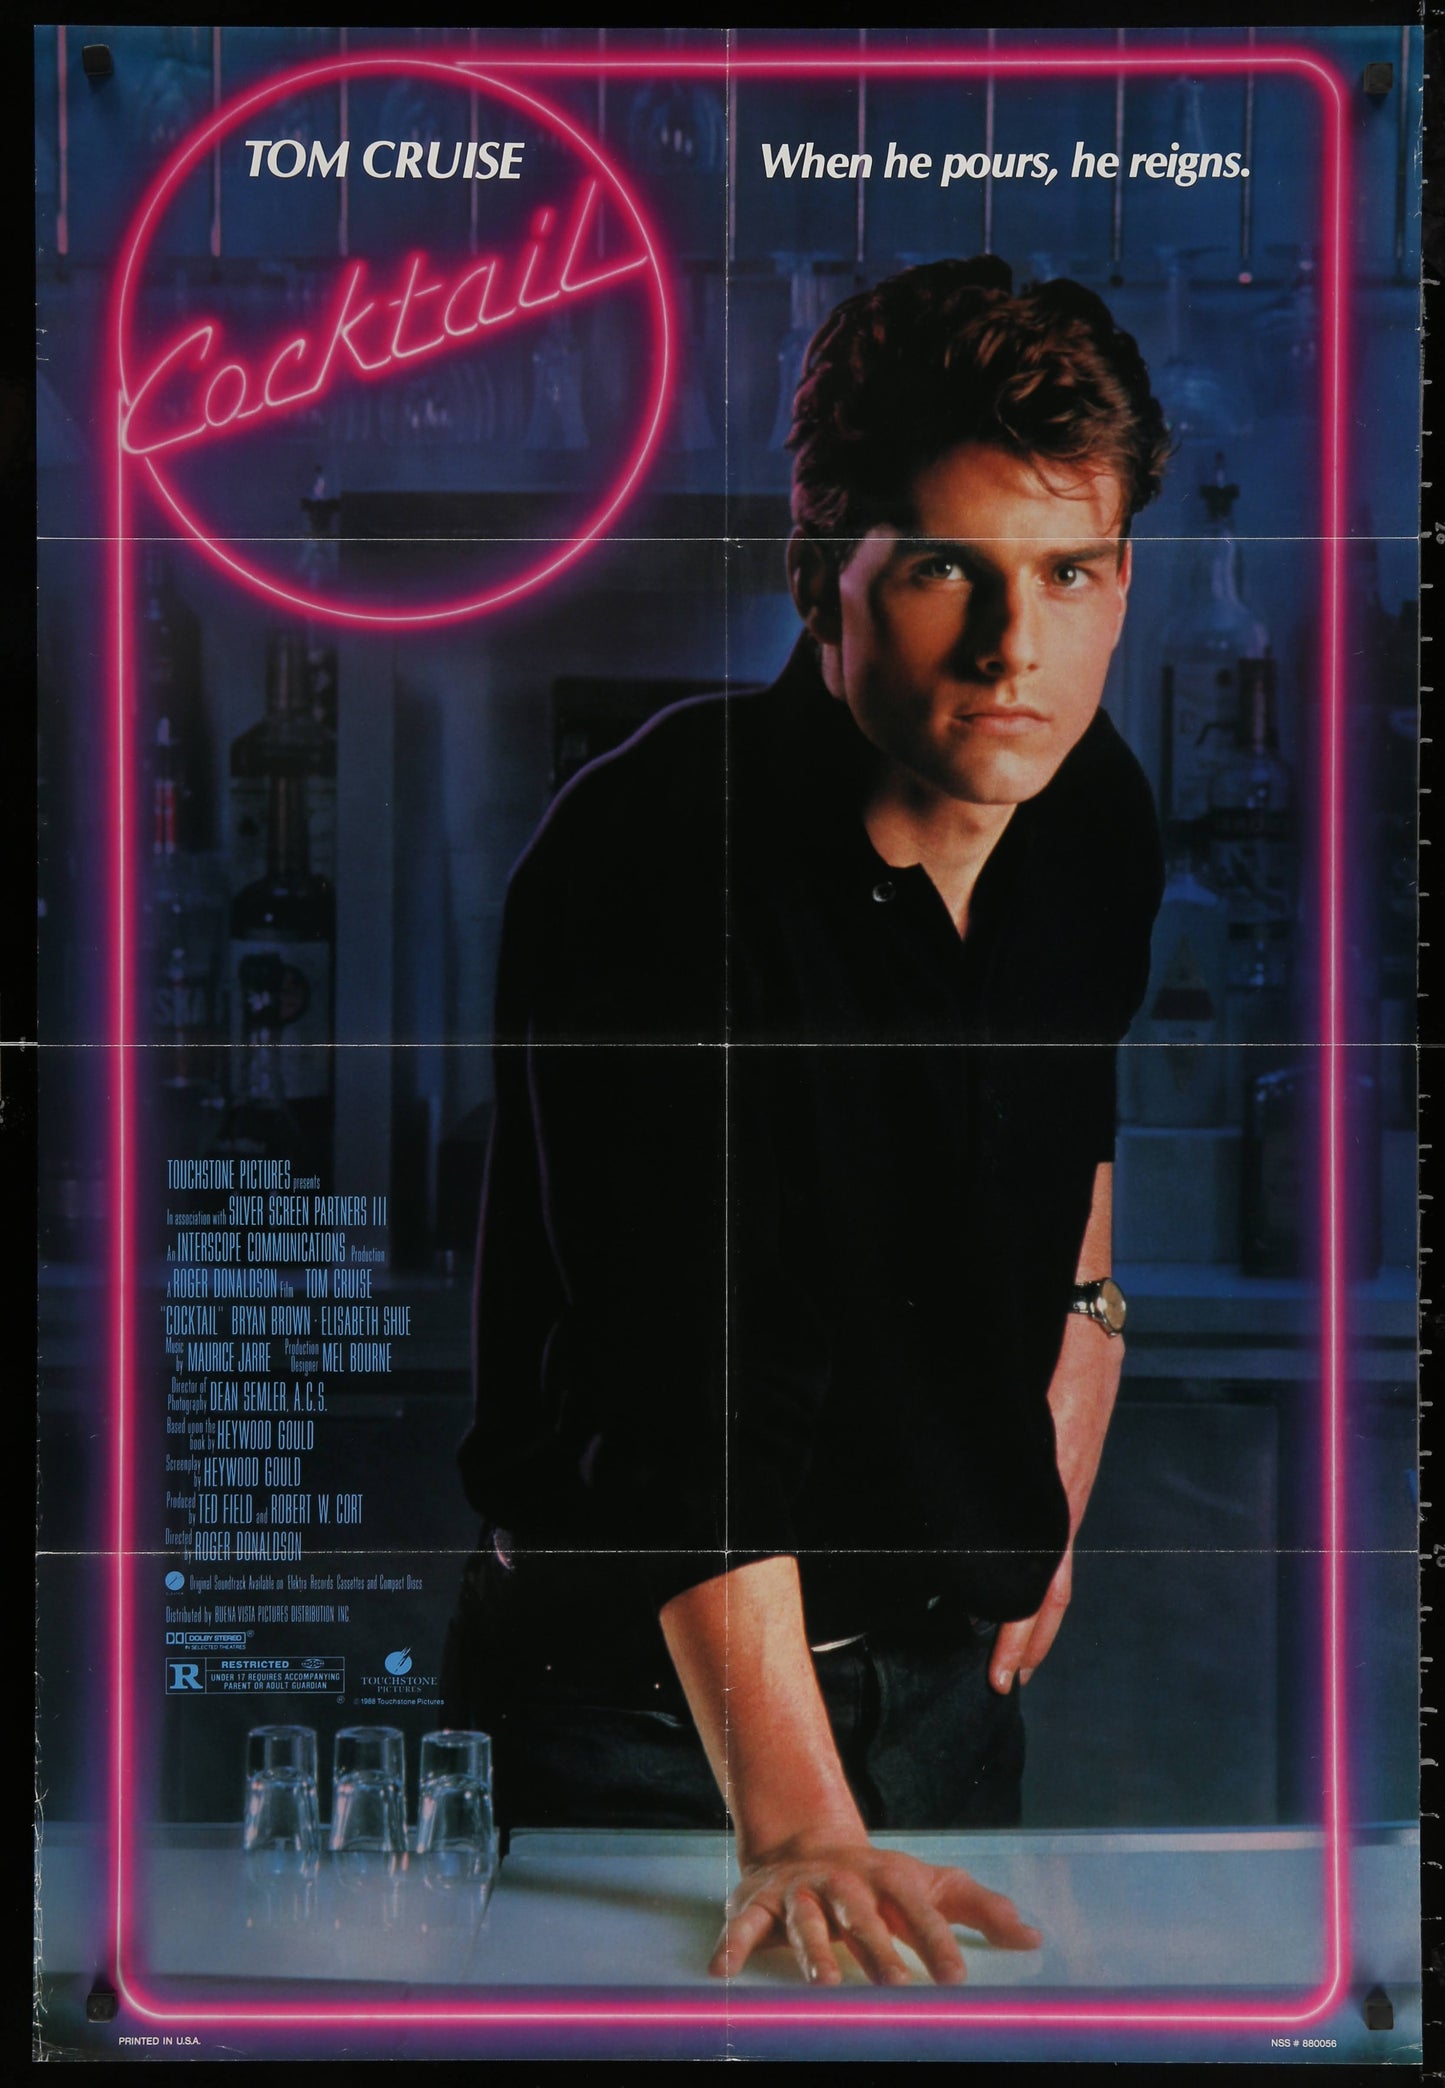 Cocktail US One Sheet (1988) - ORIGINAL RELEASE - posterpalace.com